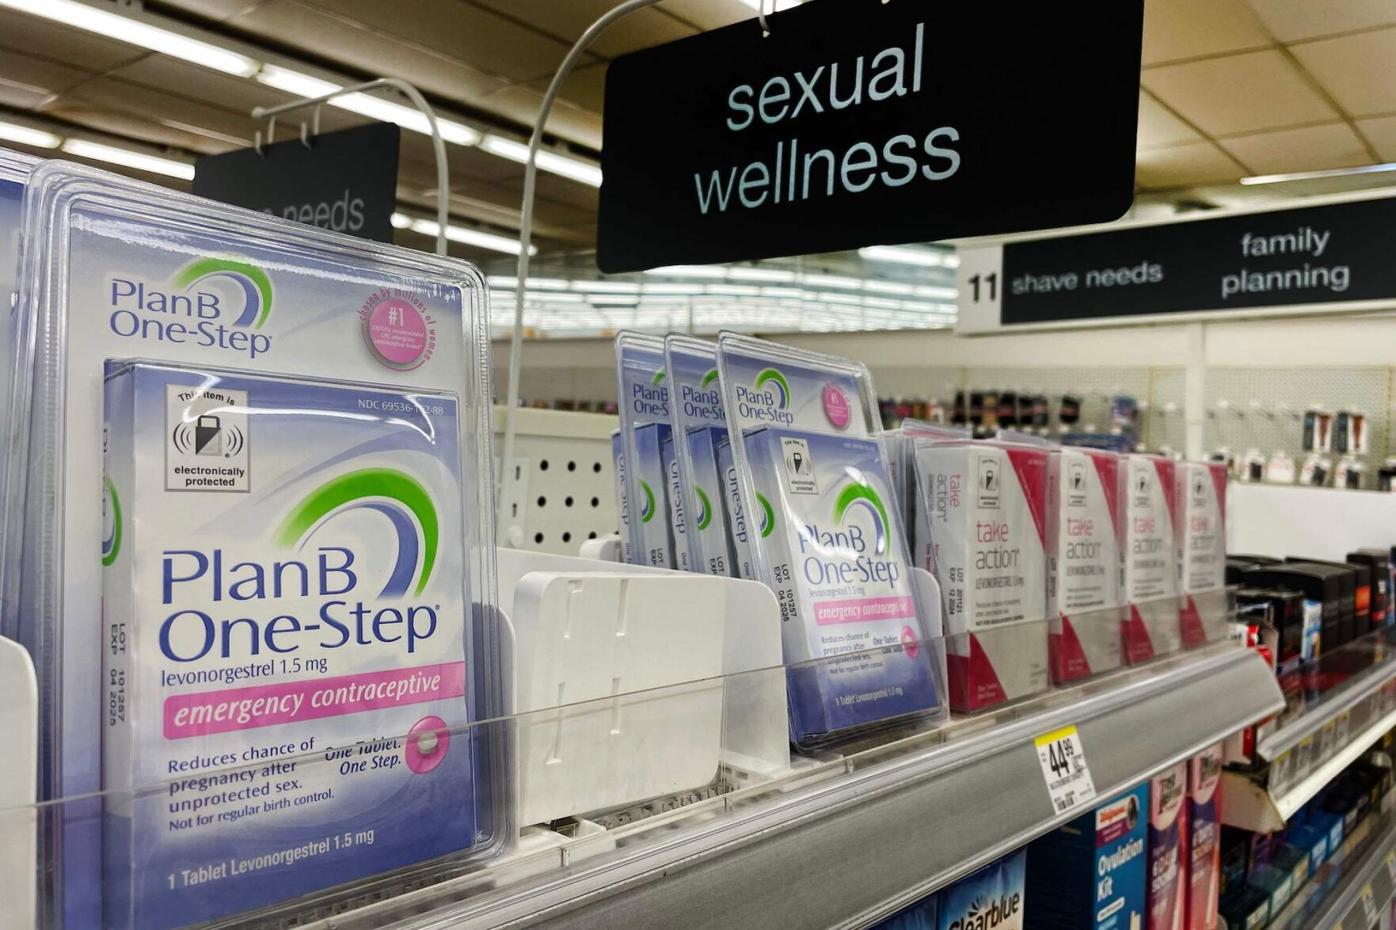 Will Indiana's abortion law affect emergency contraception like Plan B?